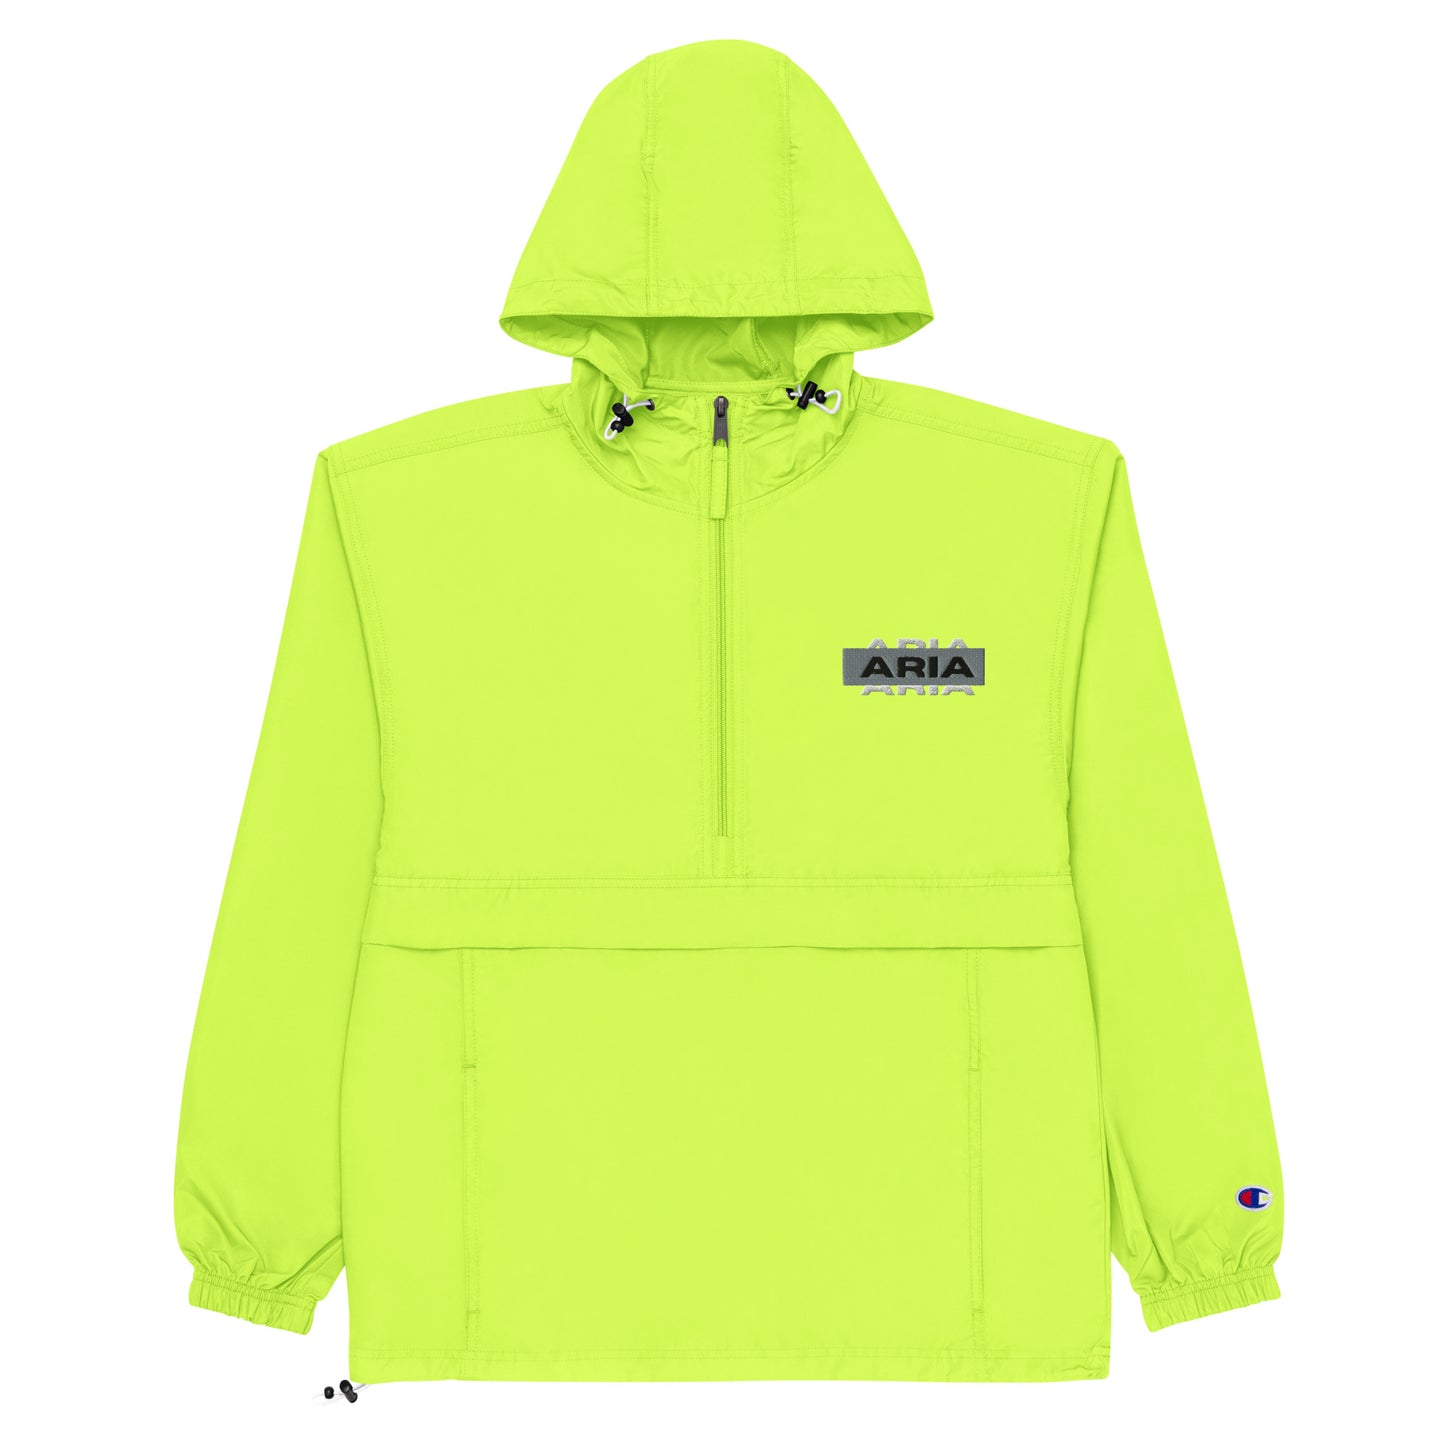 Aria X Champion Packable Jacket